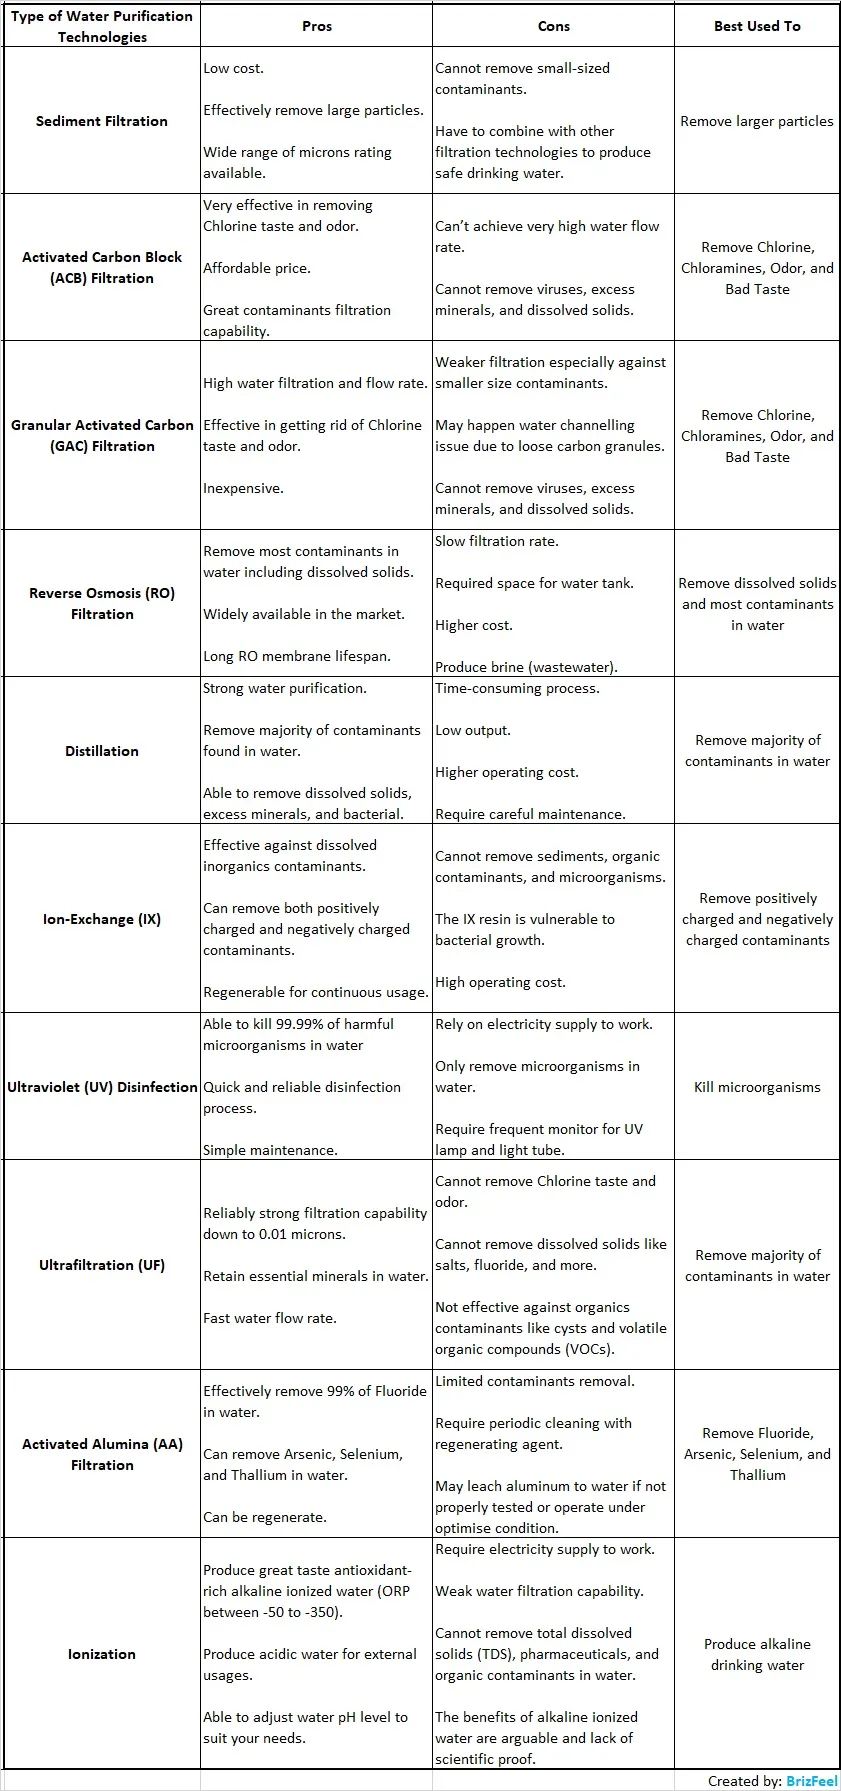 Comparison table of 10 types of water purification technologies